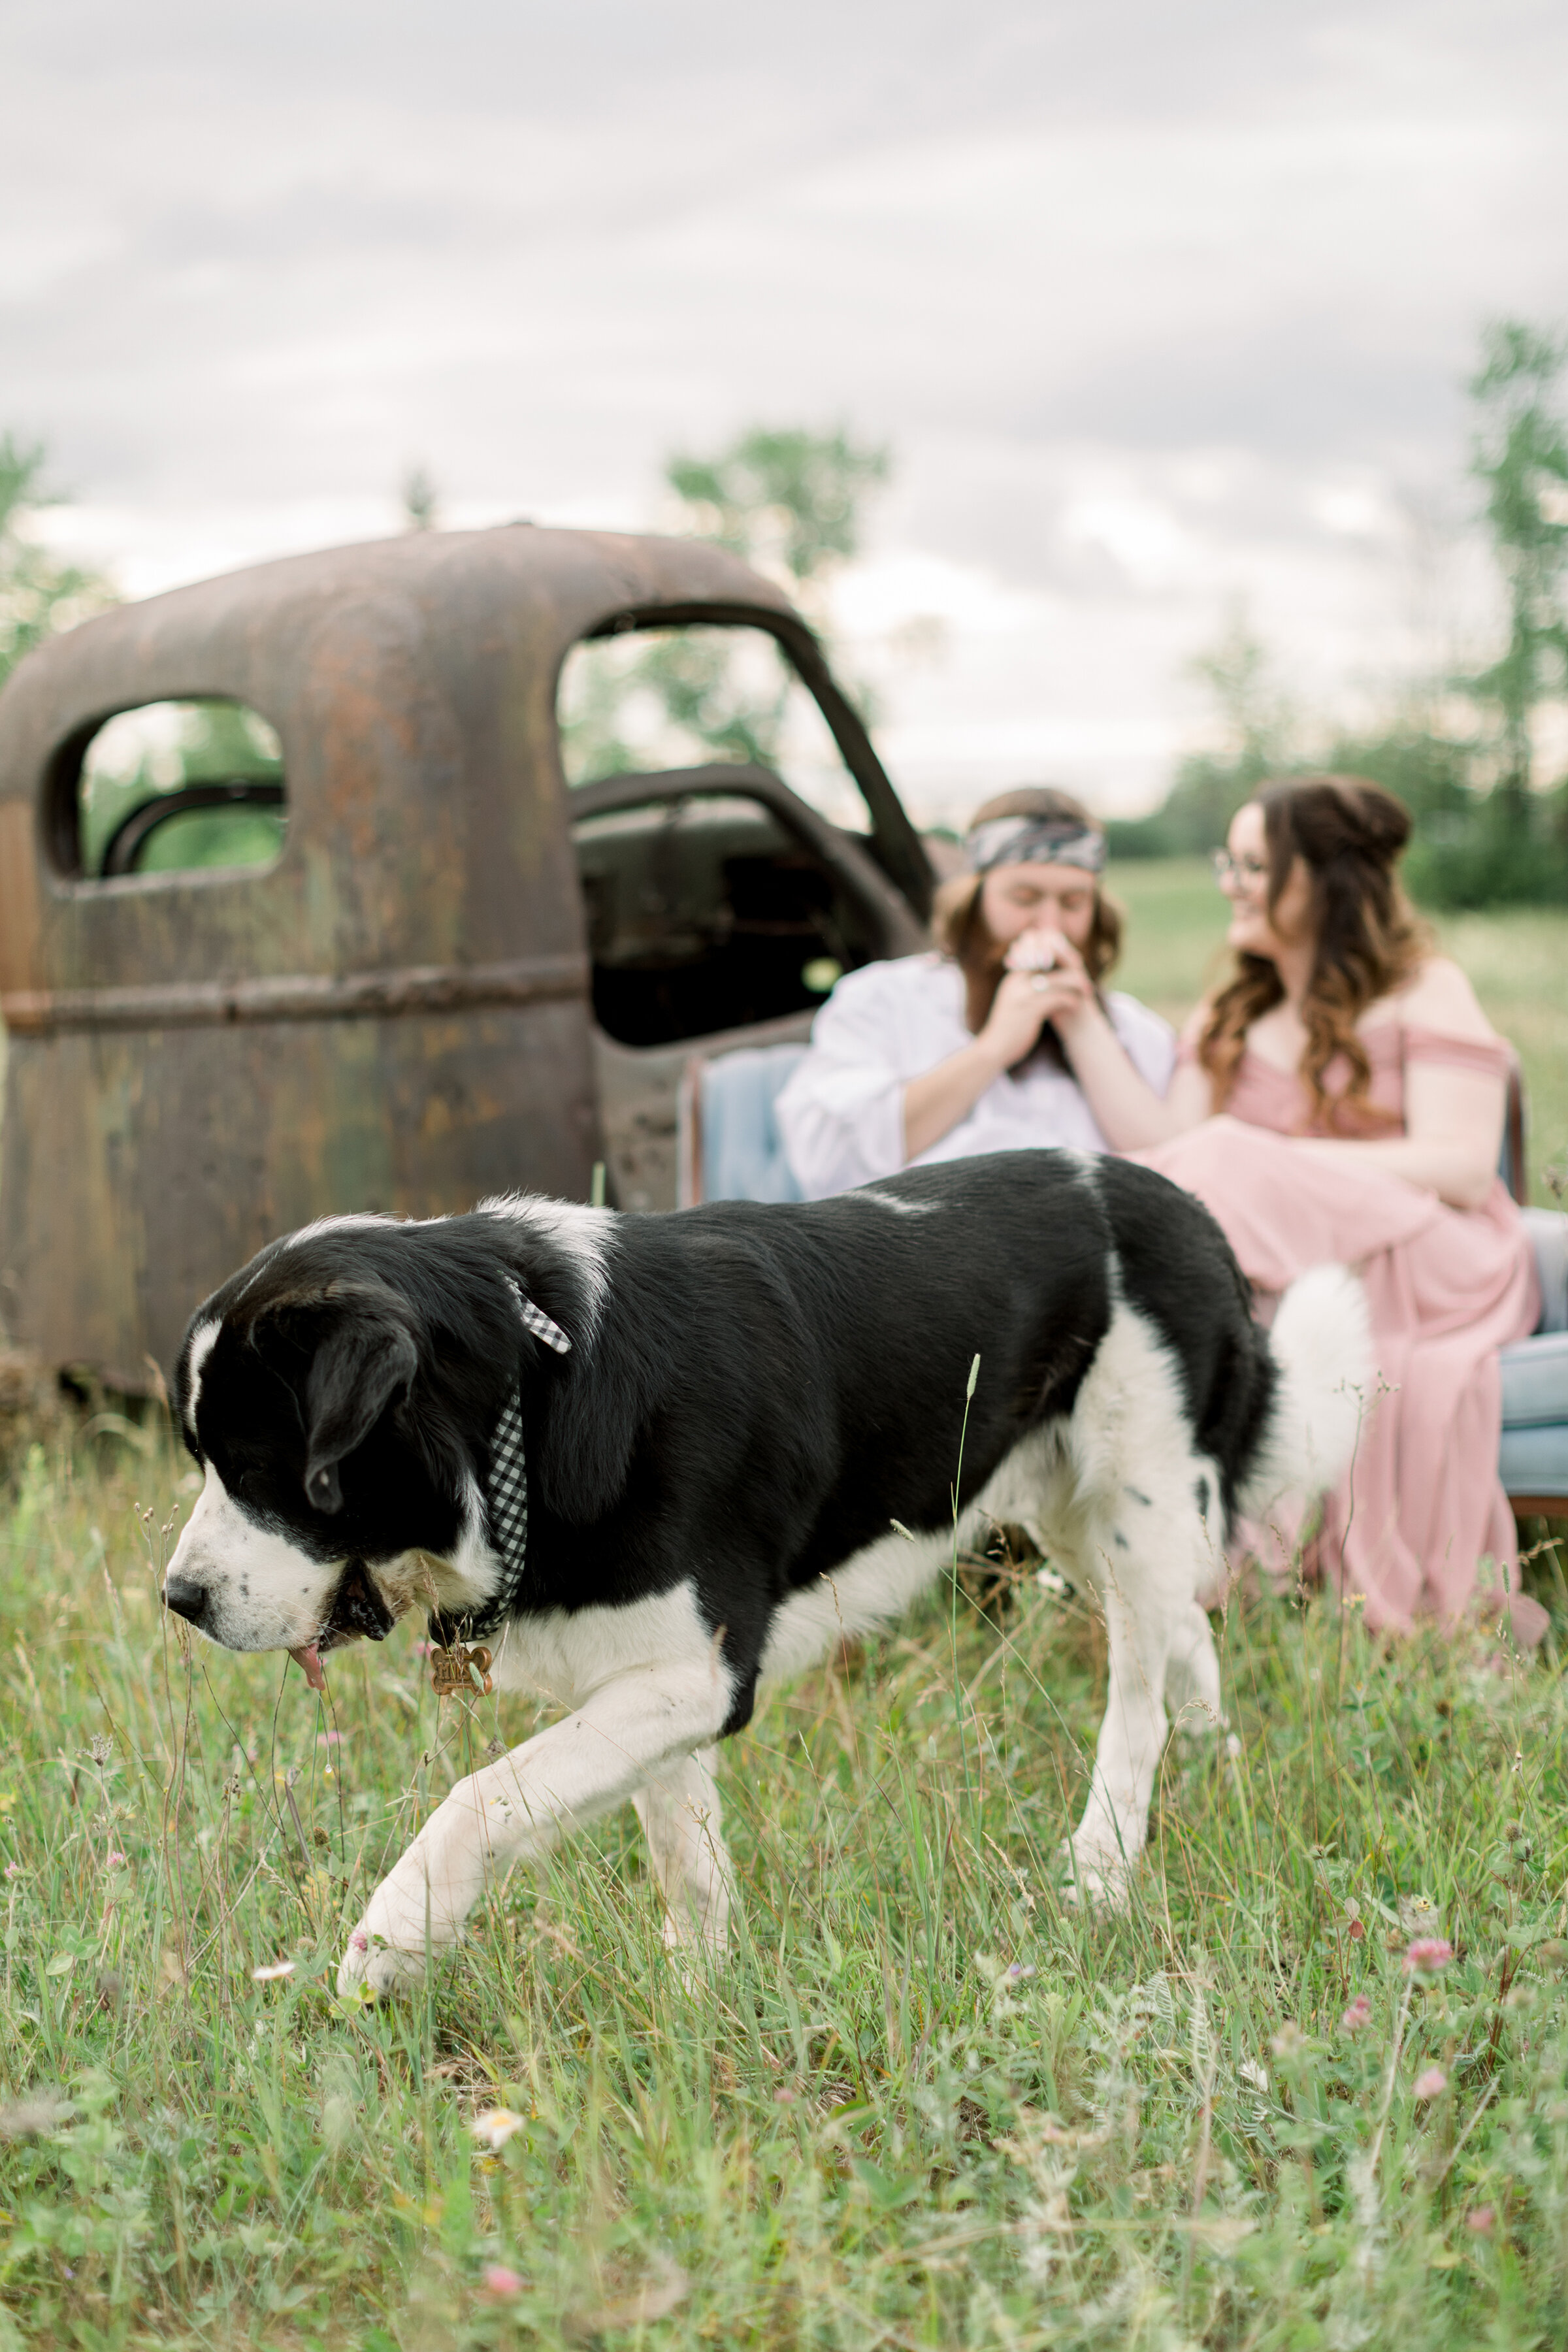  Adorable puppy at engagement photoshoot while couple toasts their upcoming wedding in the background. Rusty truck blue velvet couch in field pink off-the-shoulders engagement dress Ontario couples photographer Chelsea Mason Photography Ontario engag